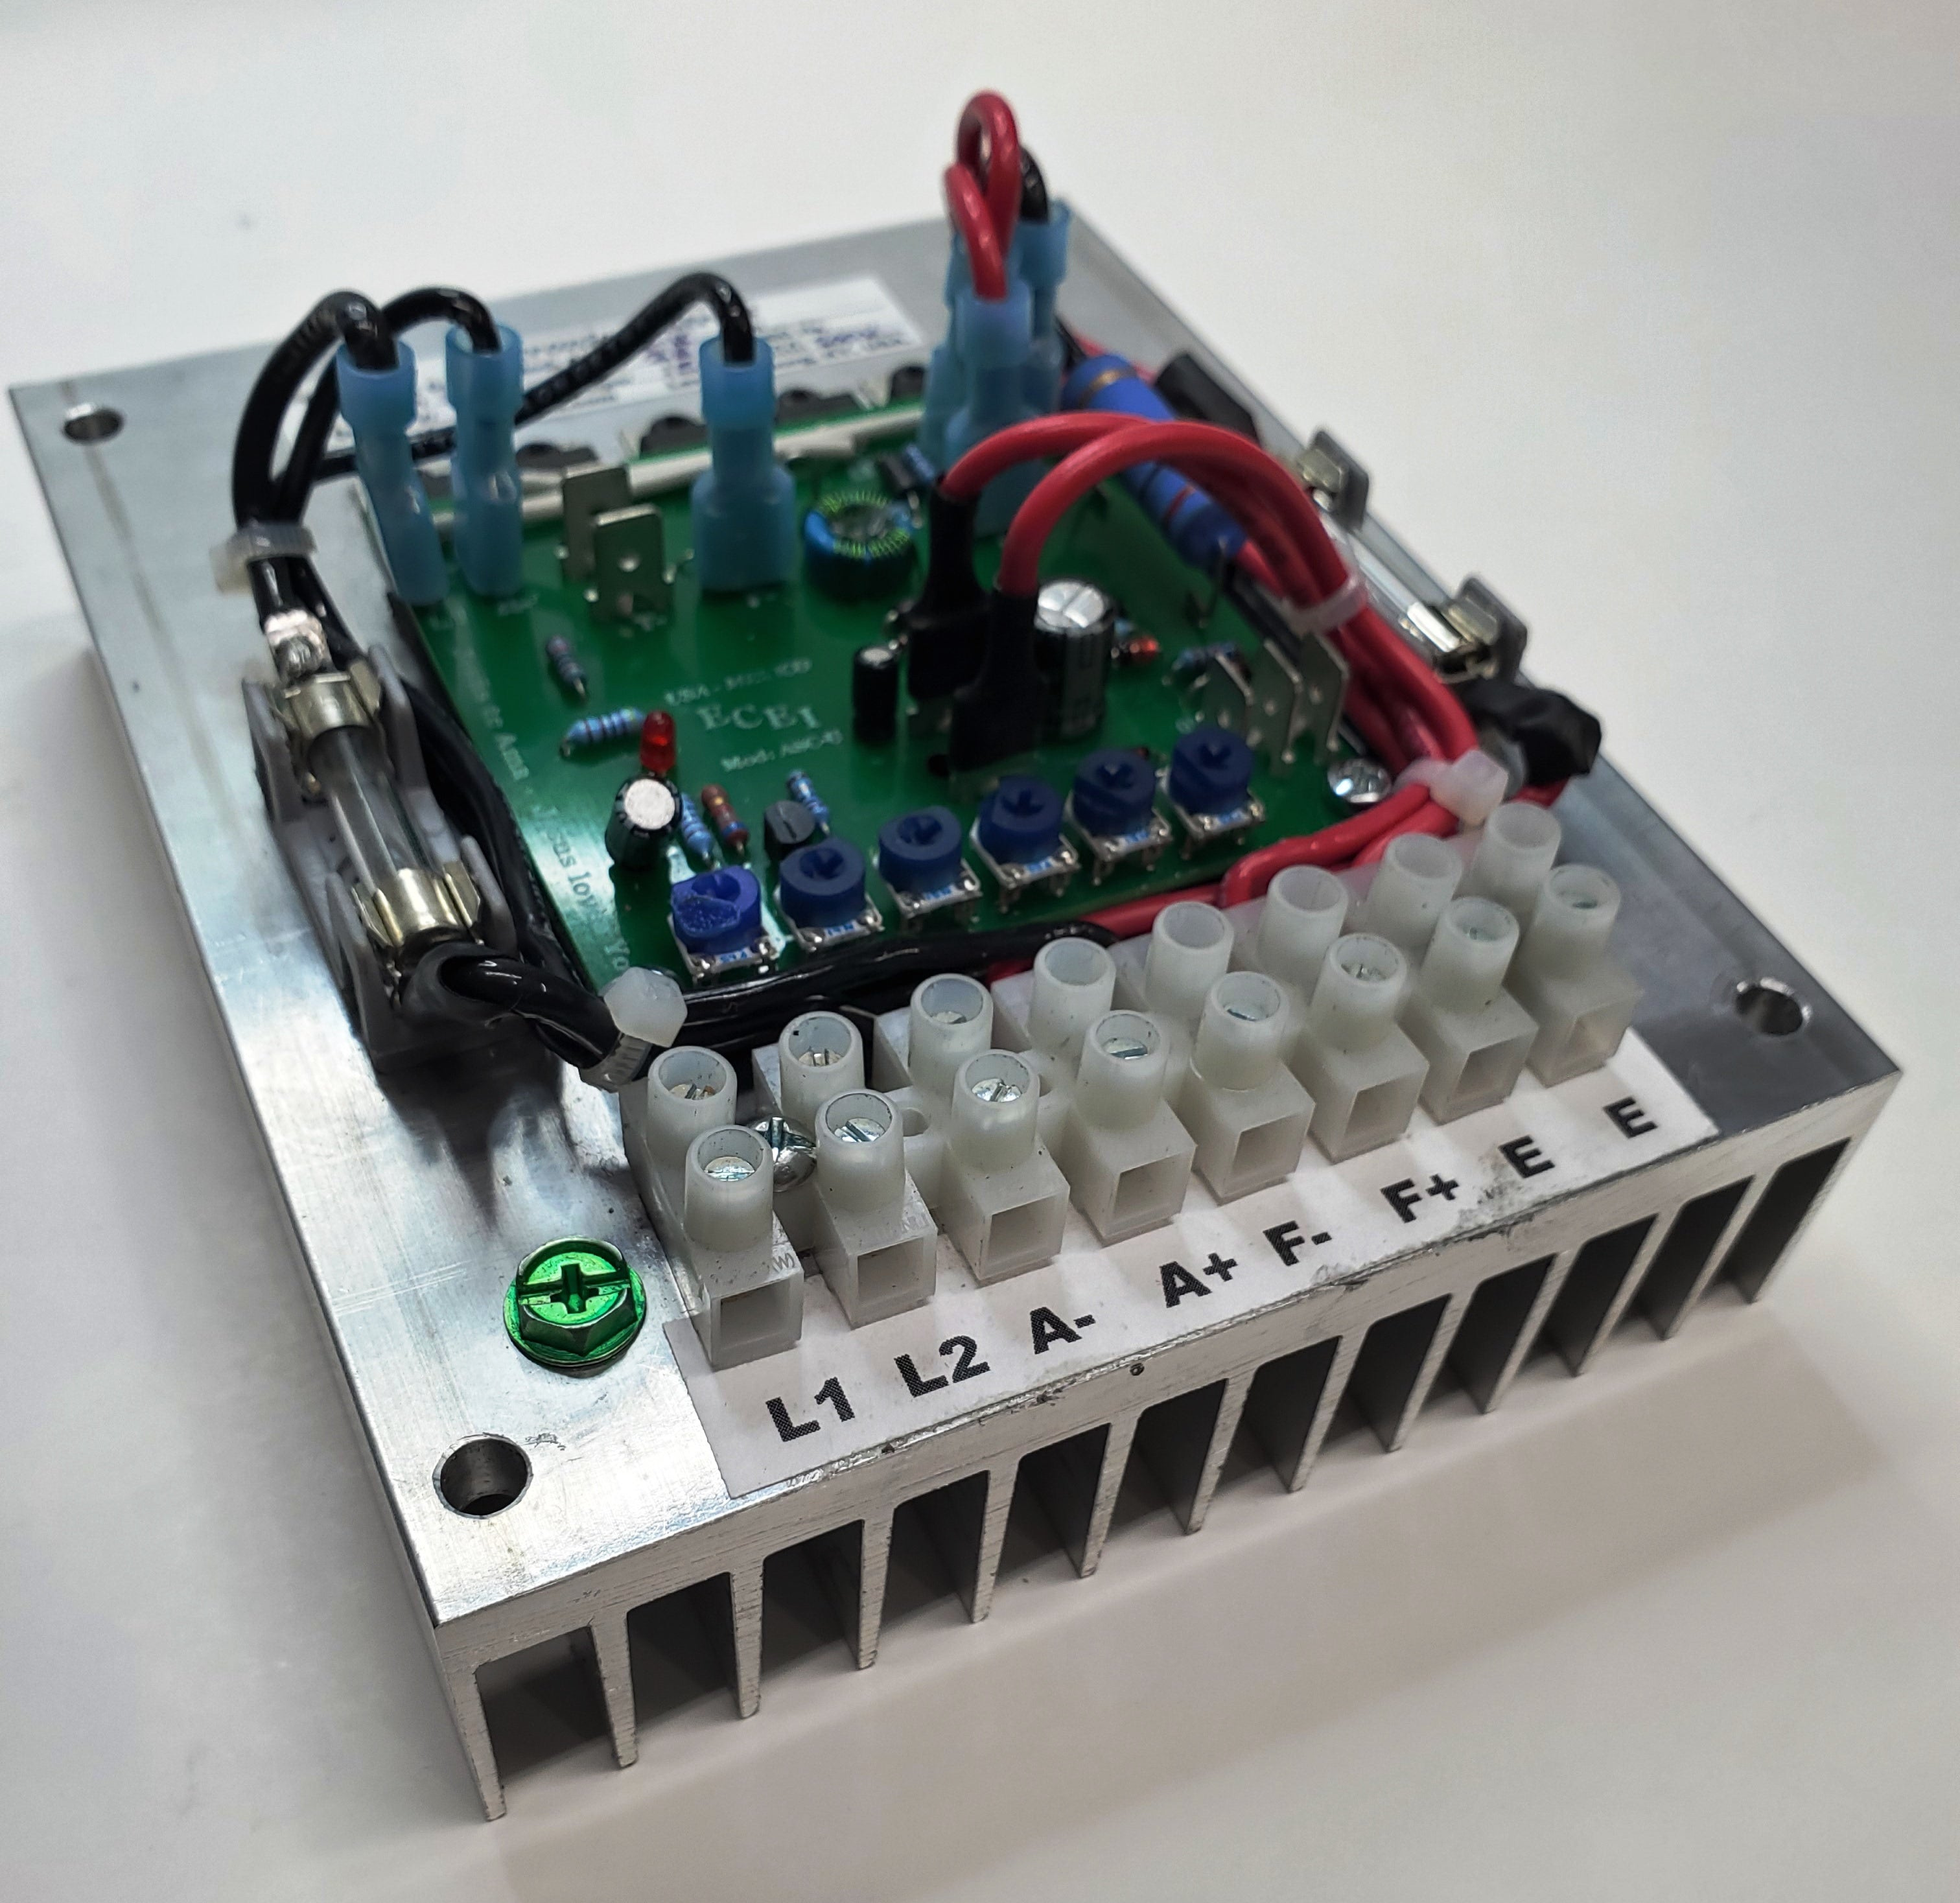 DC Motor Drive ASC2-2 For: 180V-2HP DC Motors, Open Chassis.